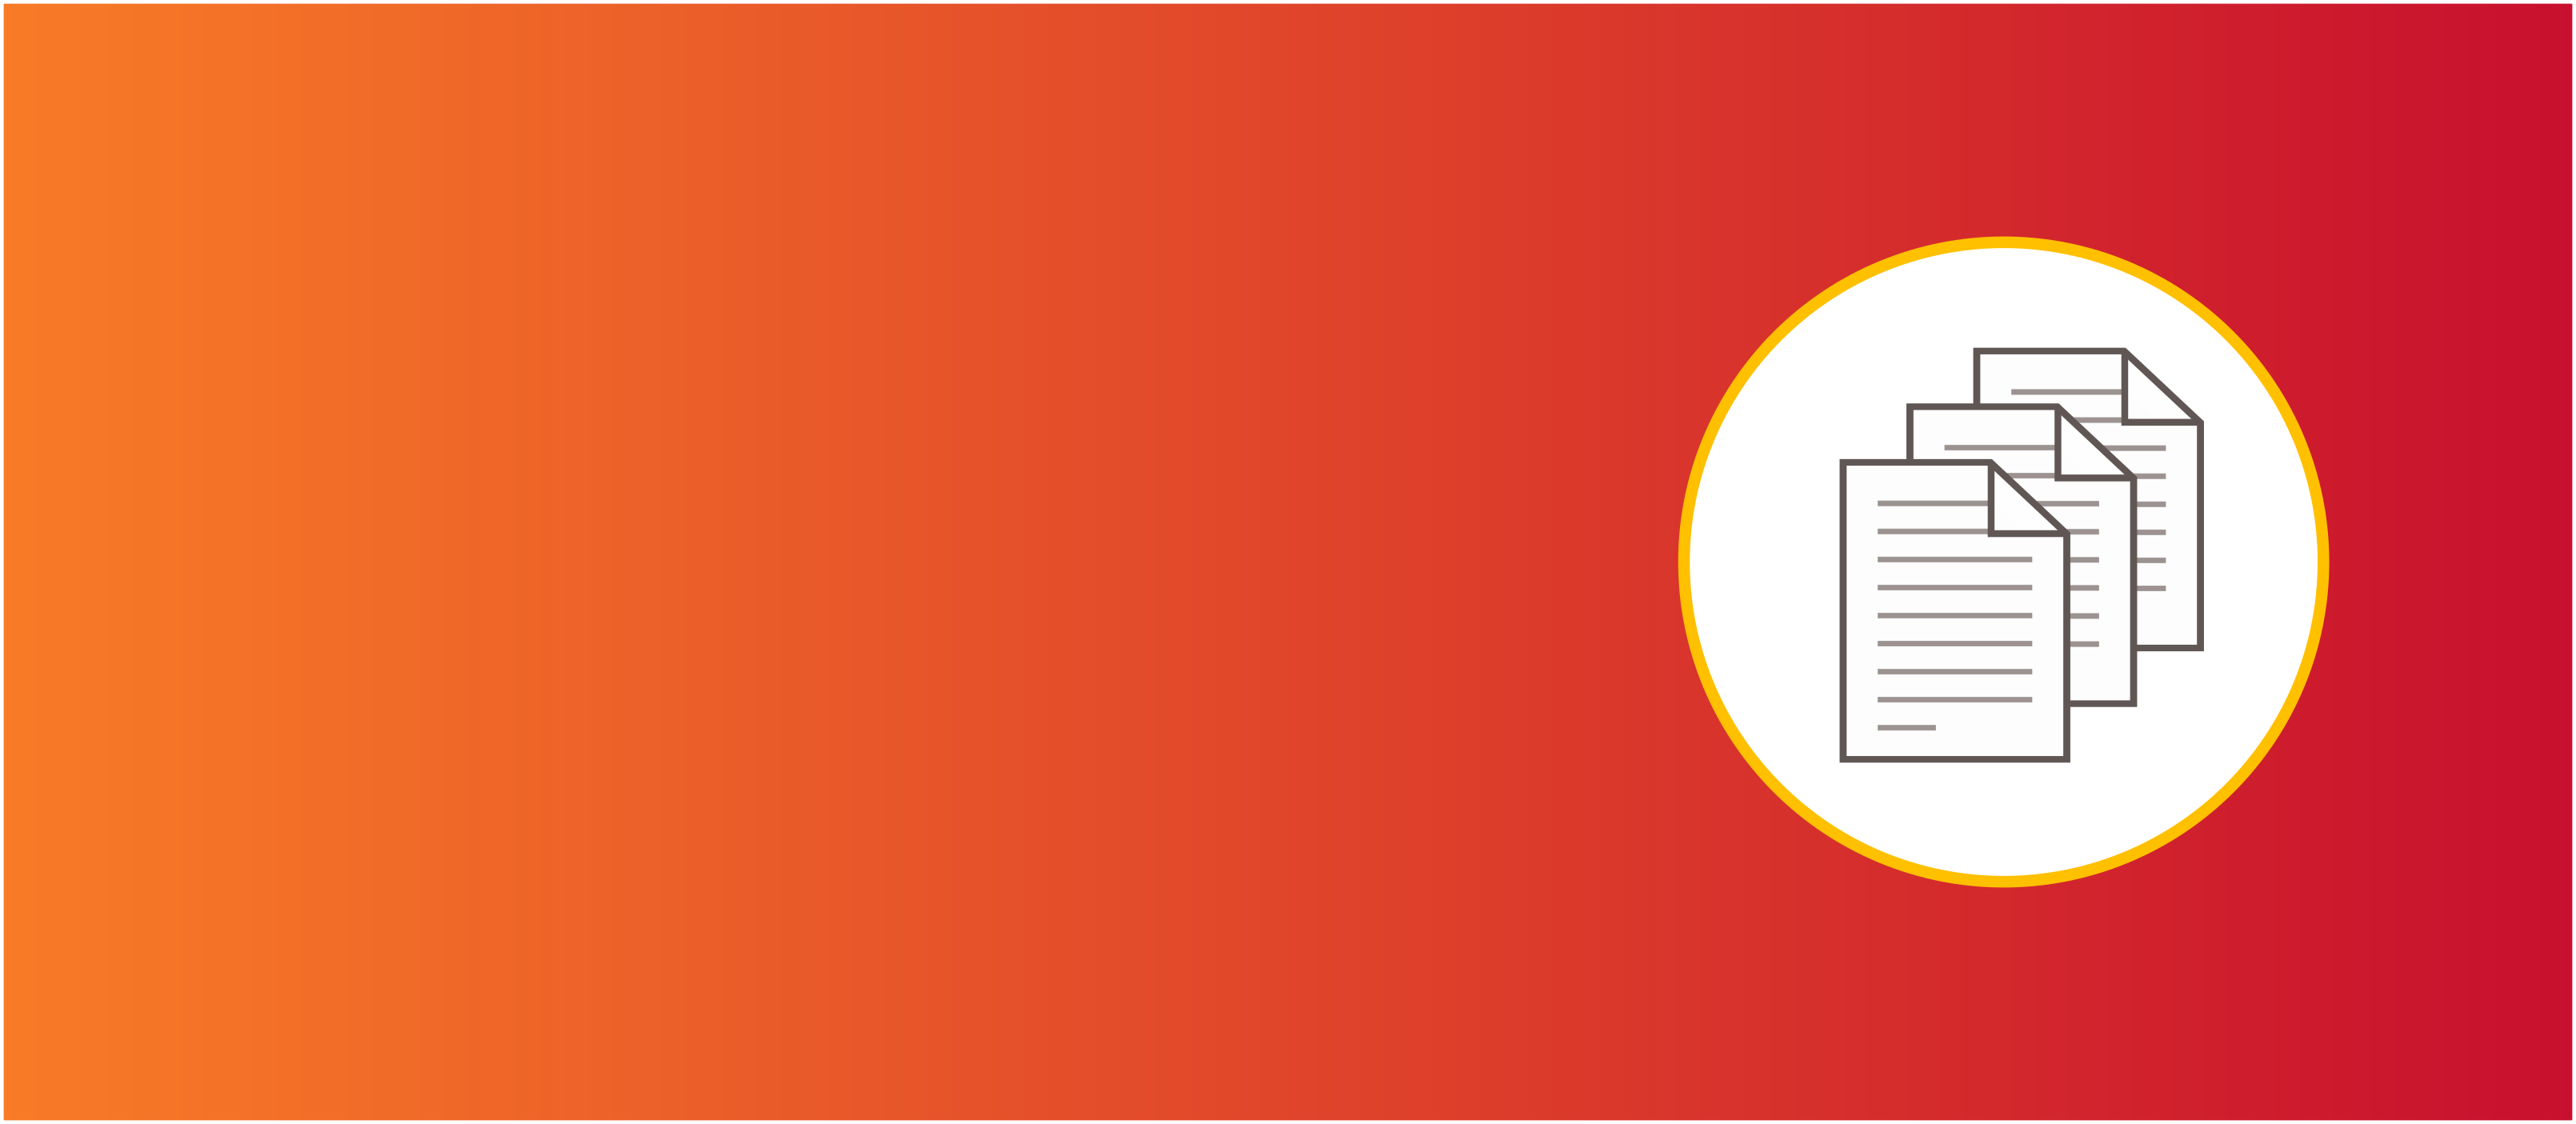 Icon of three stacked documents on a background of orange-to-red gradient